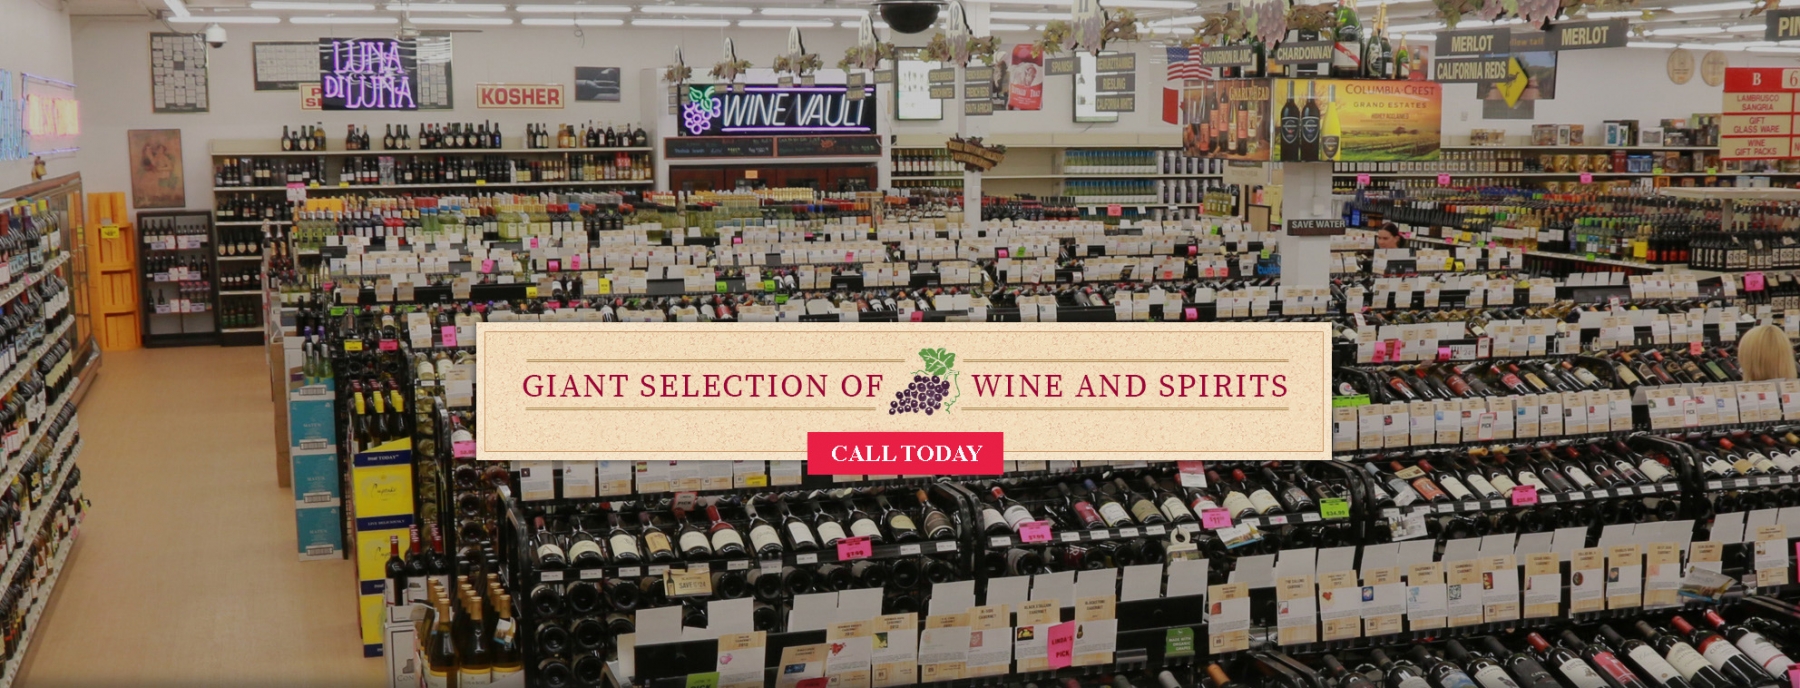 Overview Giant Slection of Wine & Spirits